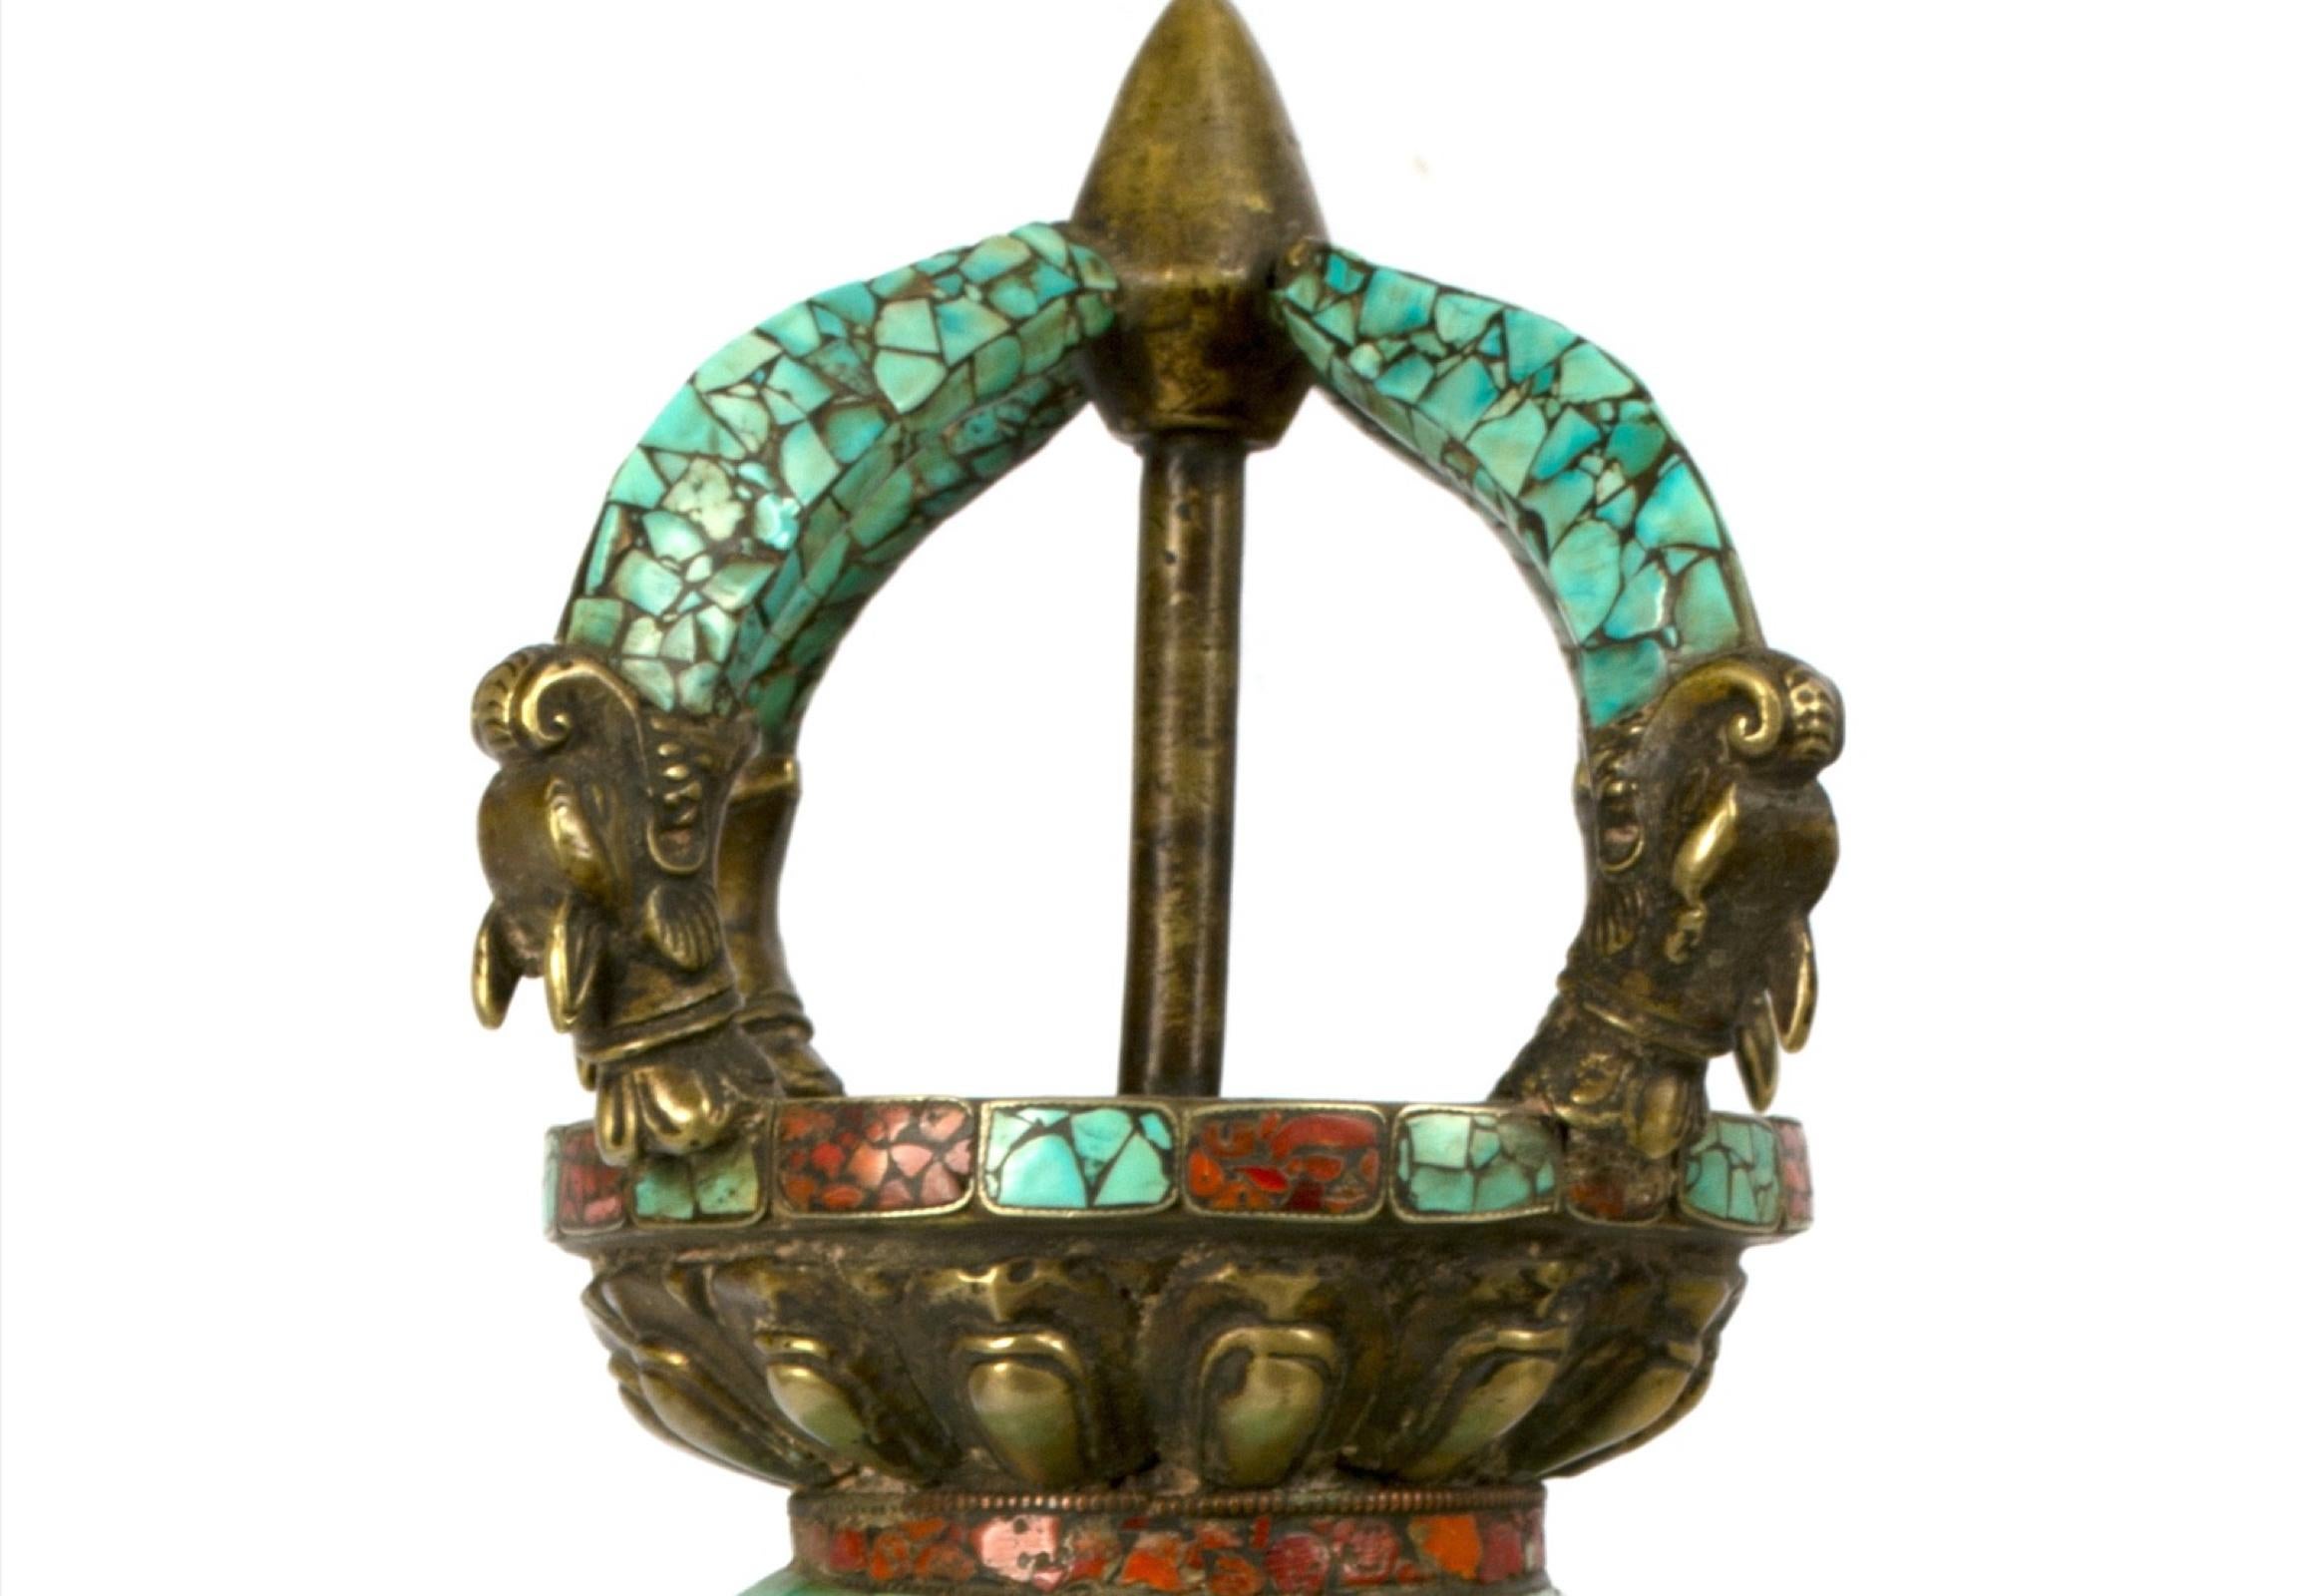 An unusual double vajra, a representation of both the diamond (indestructibility) and thunderbolt (heavenly power), covered in gilt bronze, turquoise and carnelian. The two vajras are united by a sphere (the world) and lotuses. The work is in